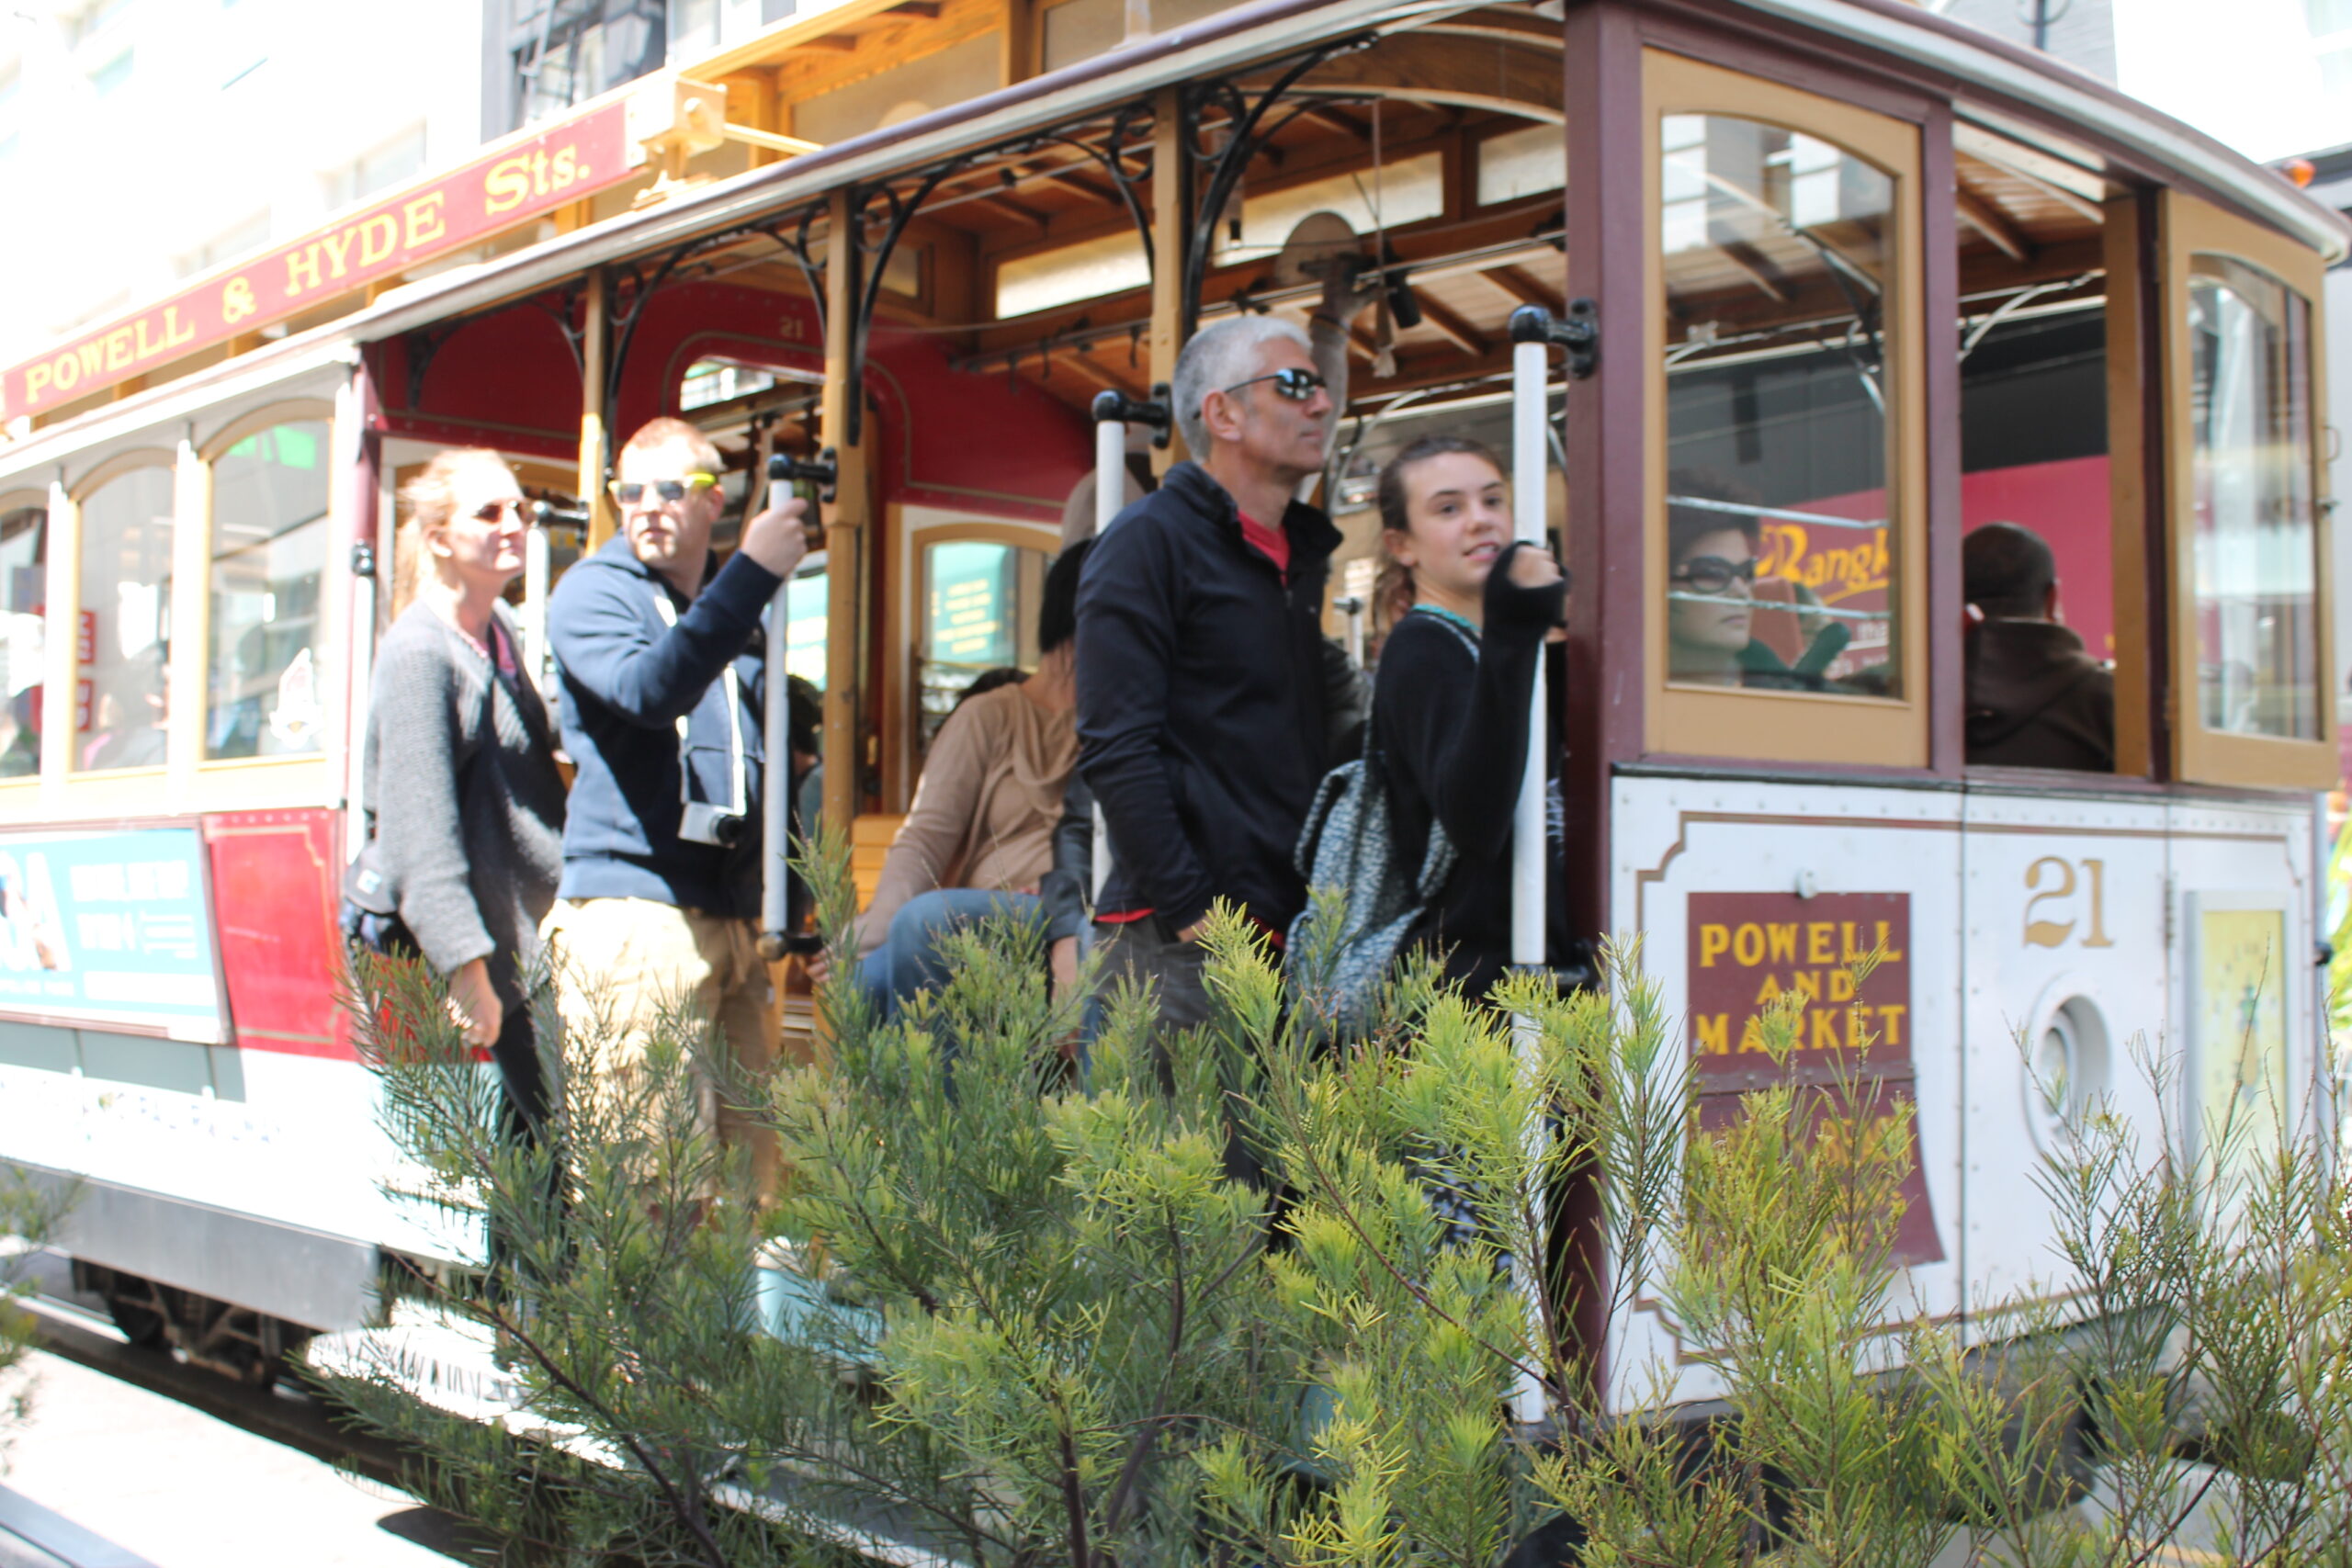 Tourists riding the cable car in Union Square in San Francisco. (Photo: Super G)